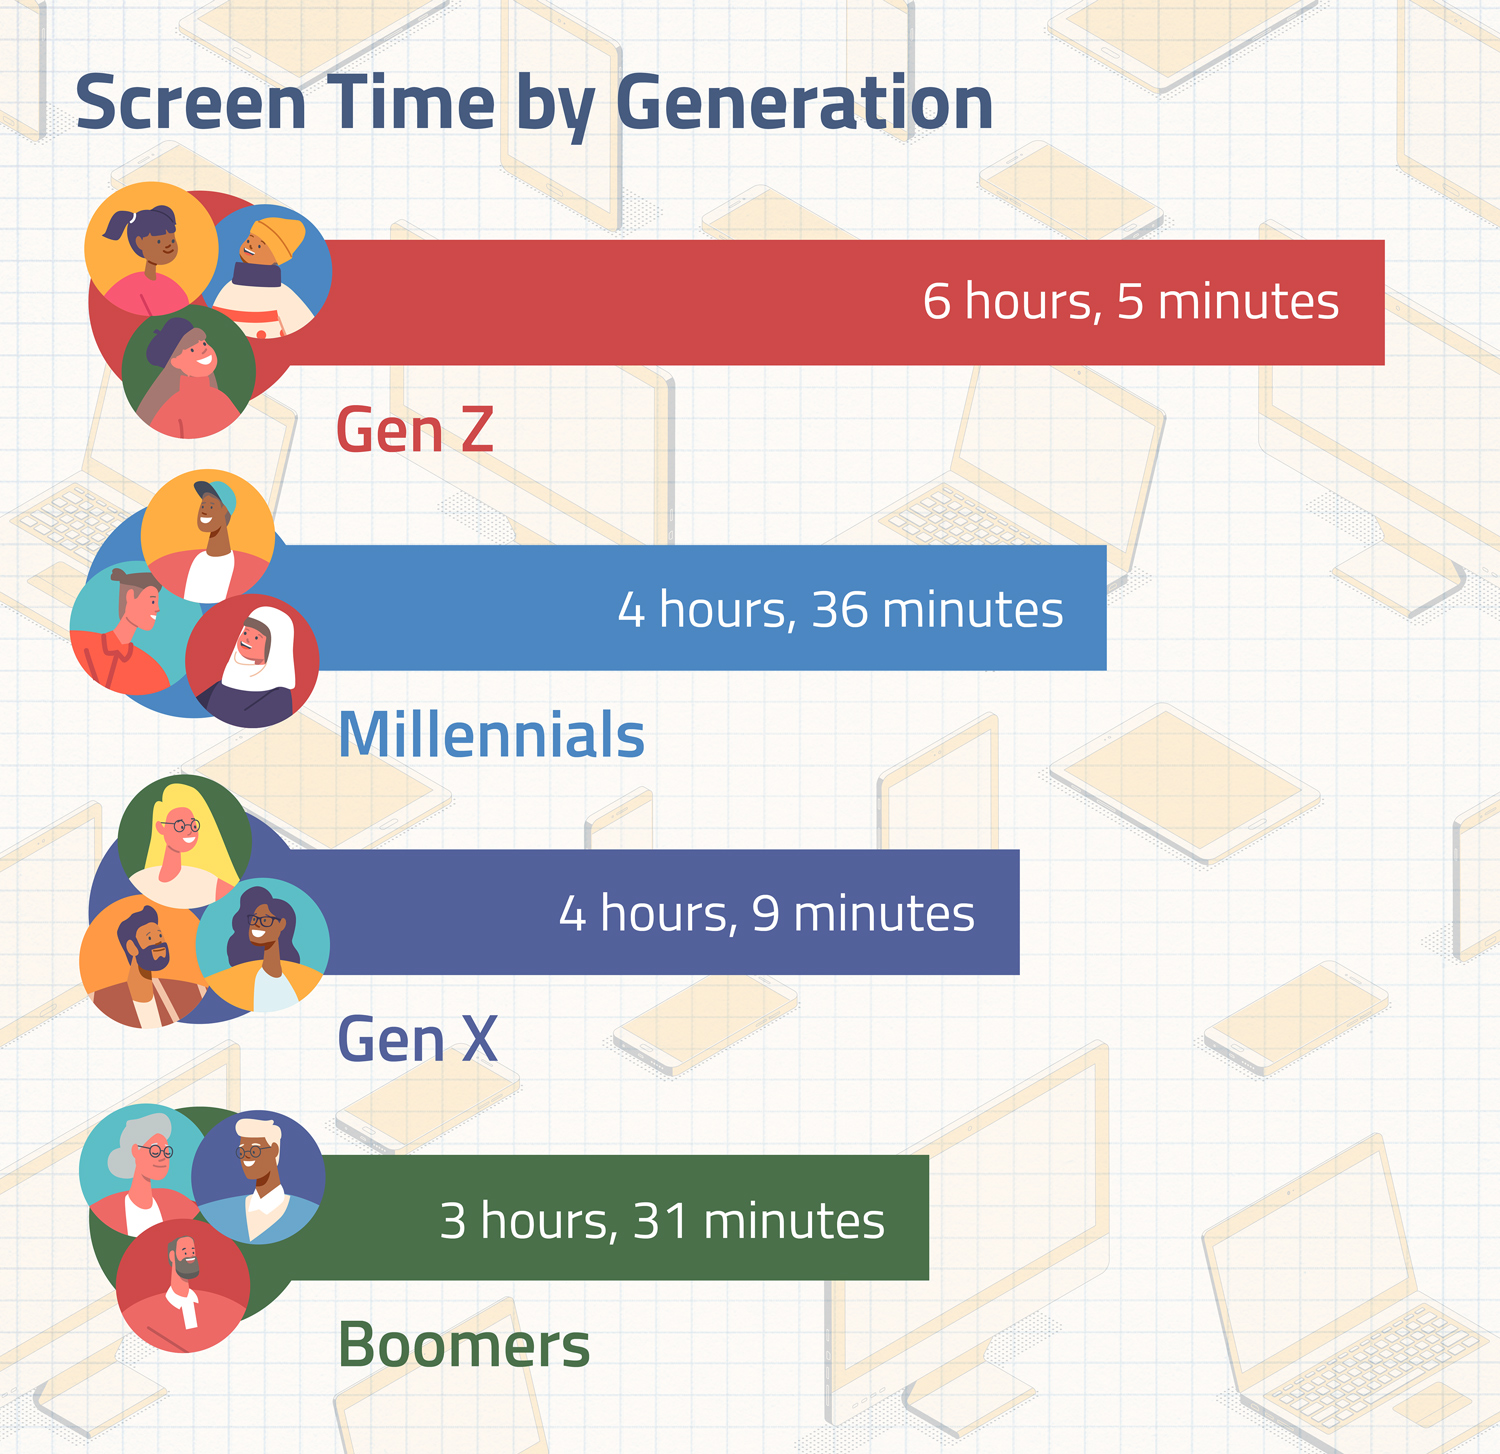 A graph compares the average amount of screen time for Gen Z, Millennials, Gen X, and Boomers.